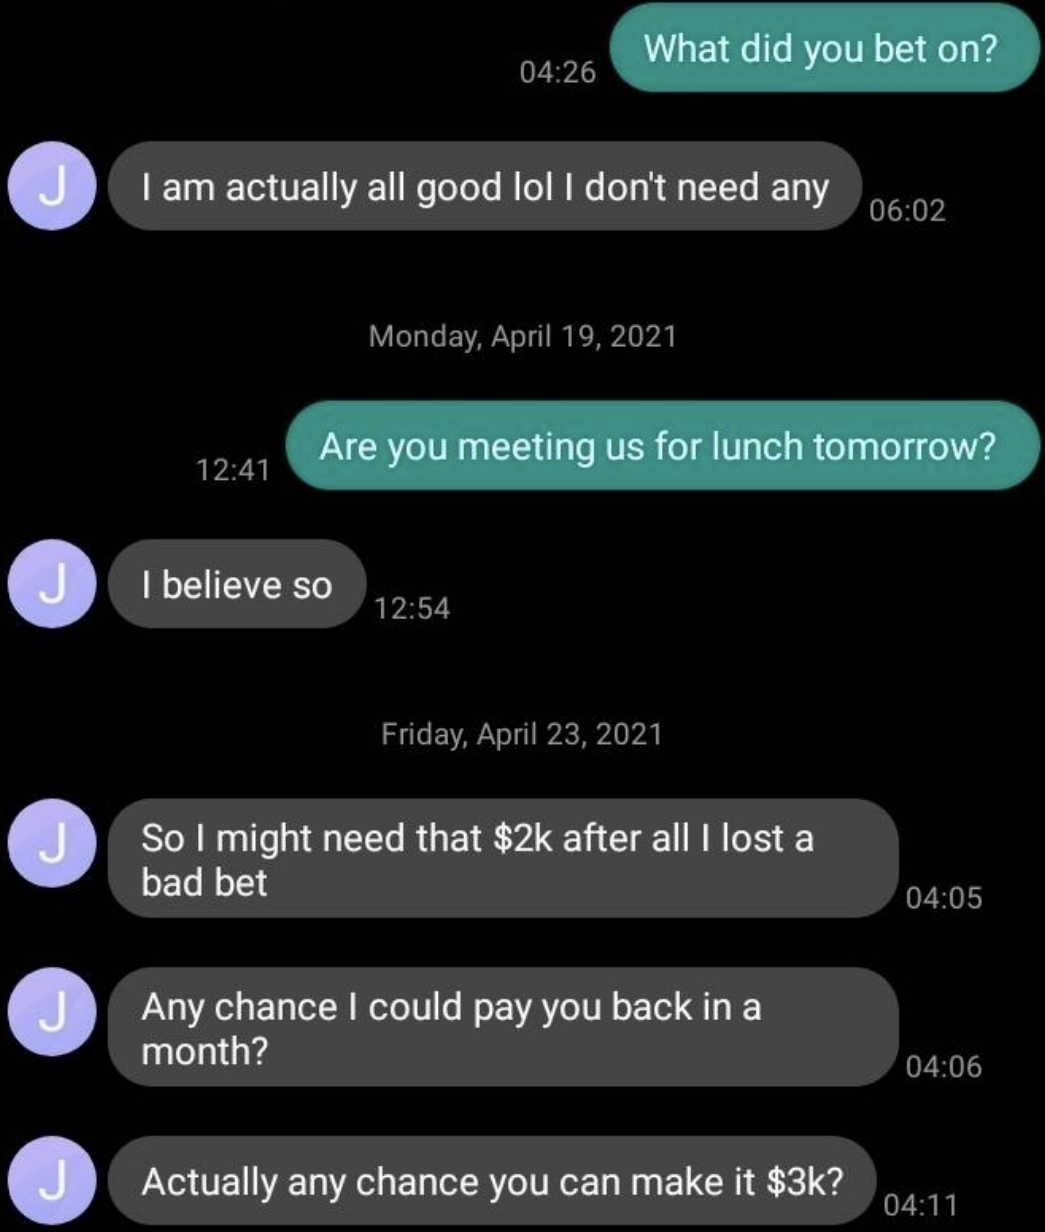 A text where a person says they don&#x27;t need any money, then a few days later says they now need money after a bad bet, first asking for $2,000 then increasing it to $3,000